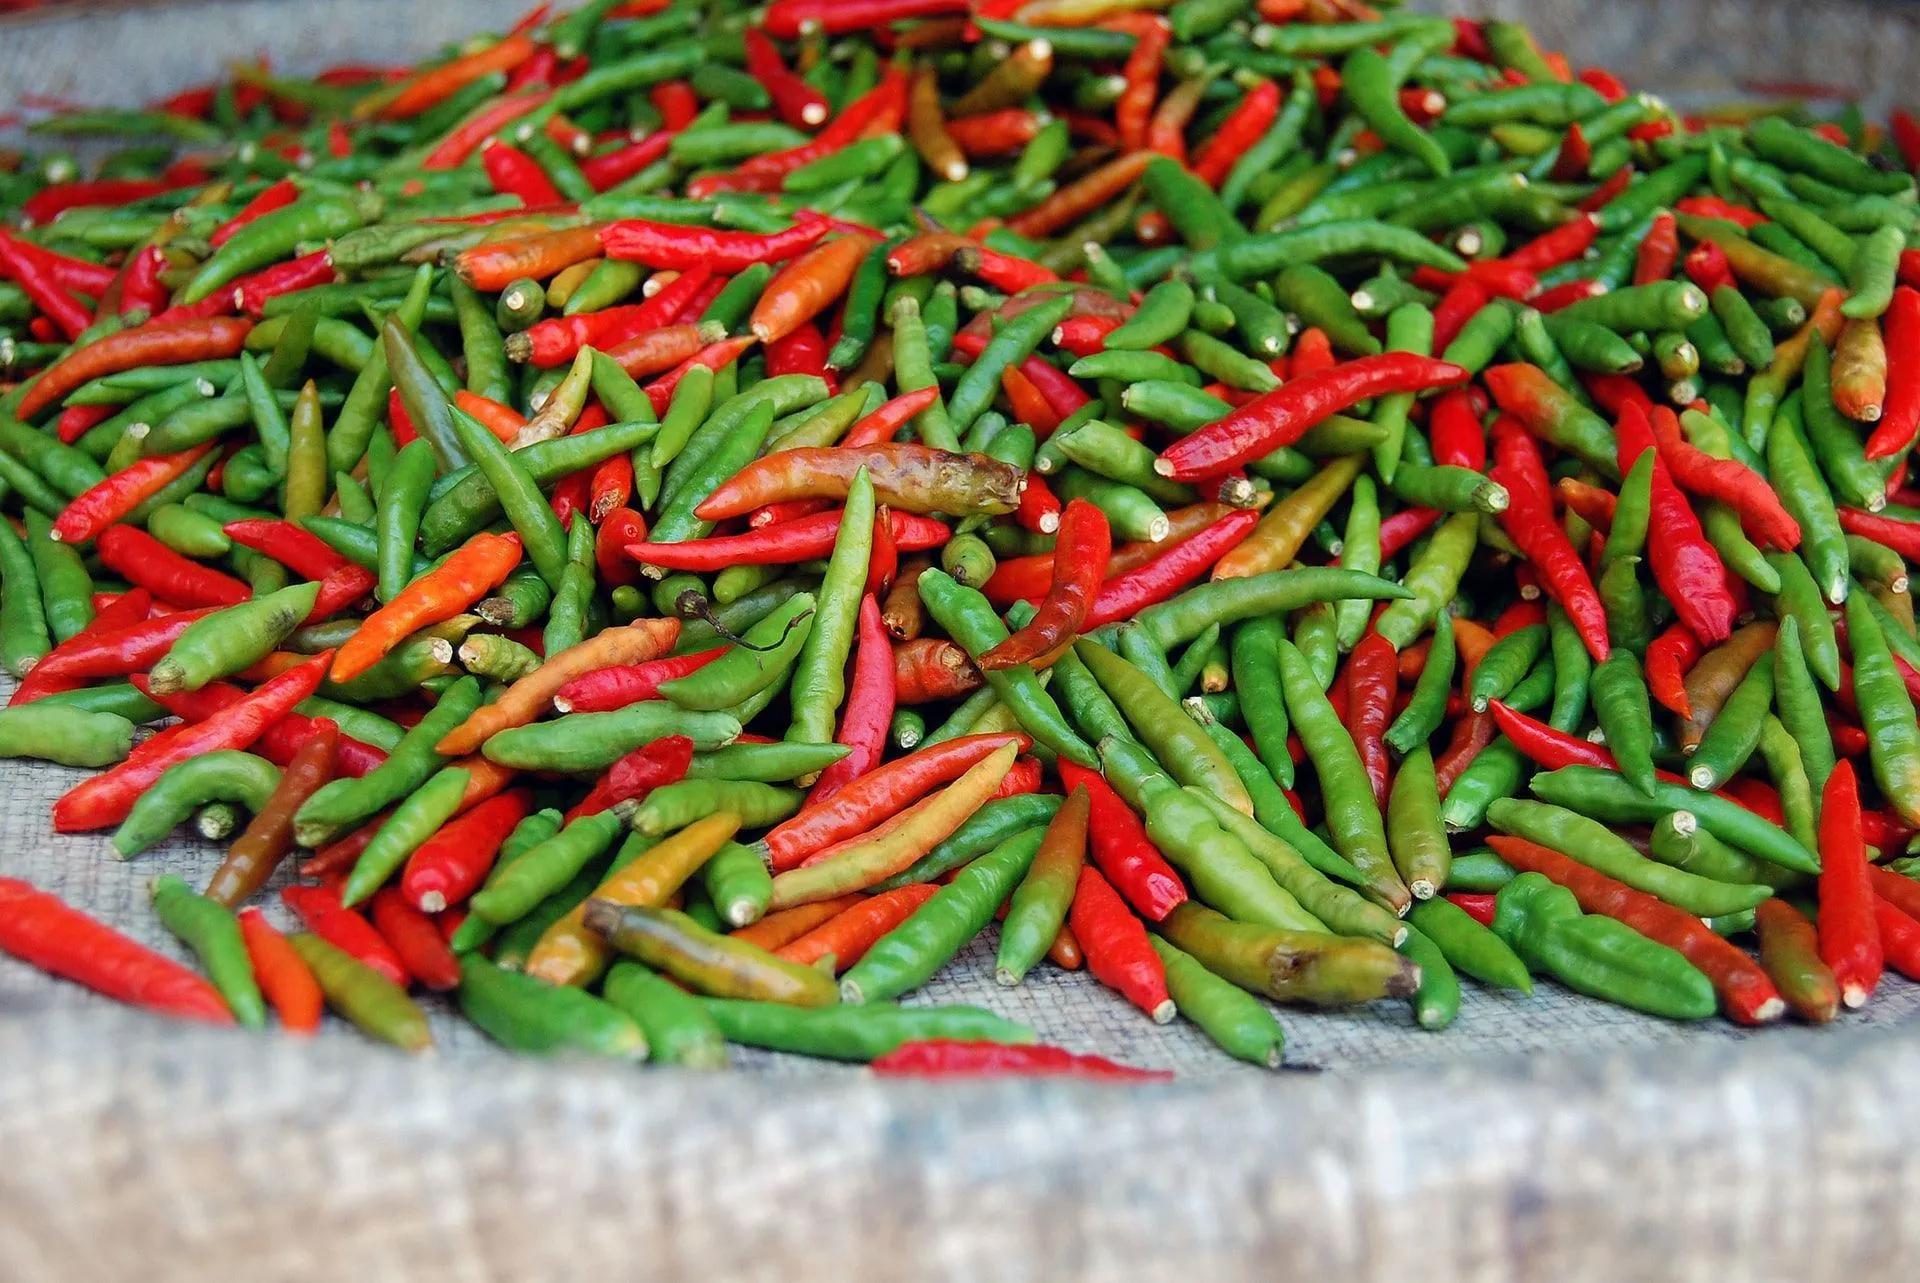 How Hot Are Serrano Peppers? Spicy Scales Explained For Kids